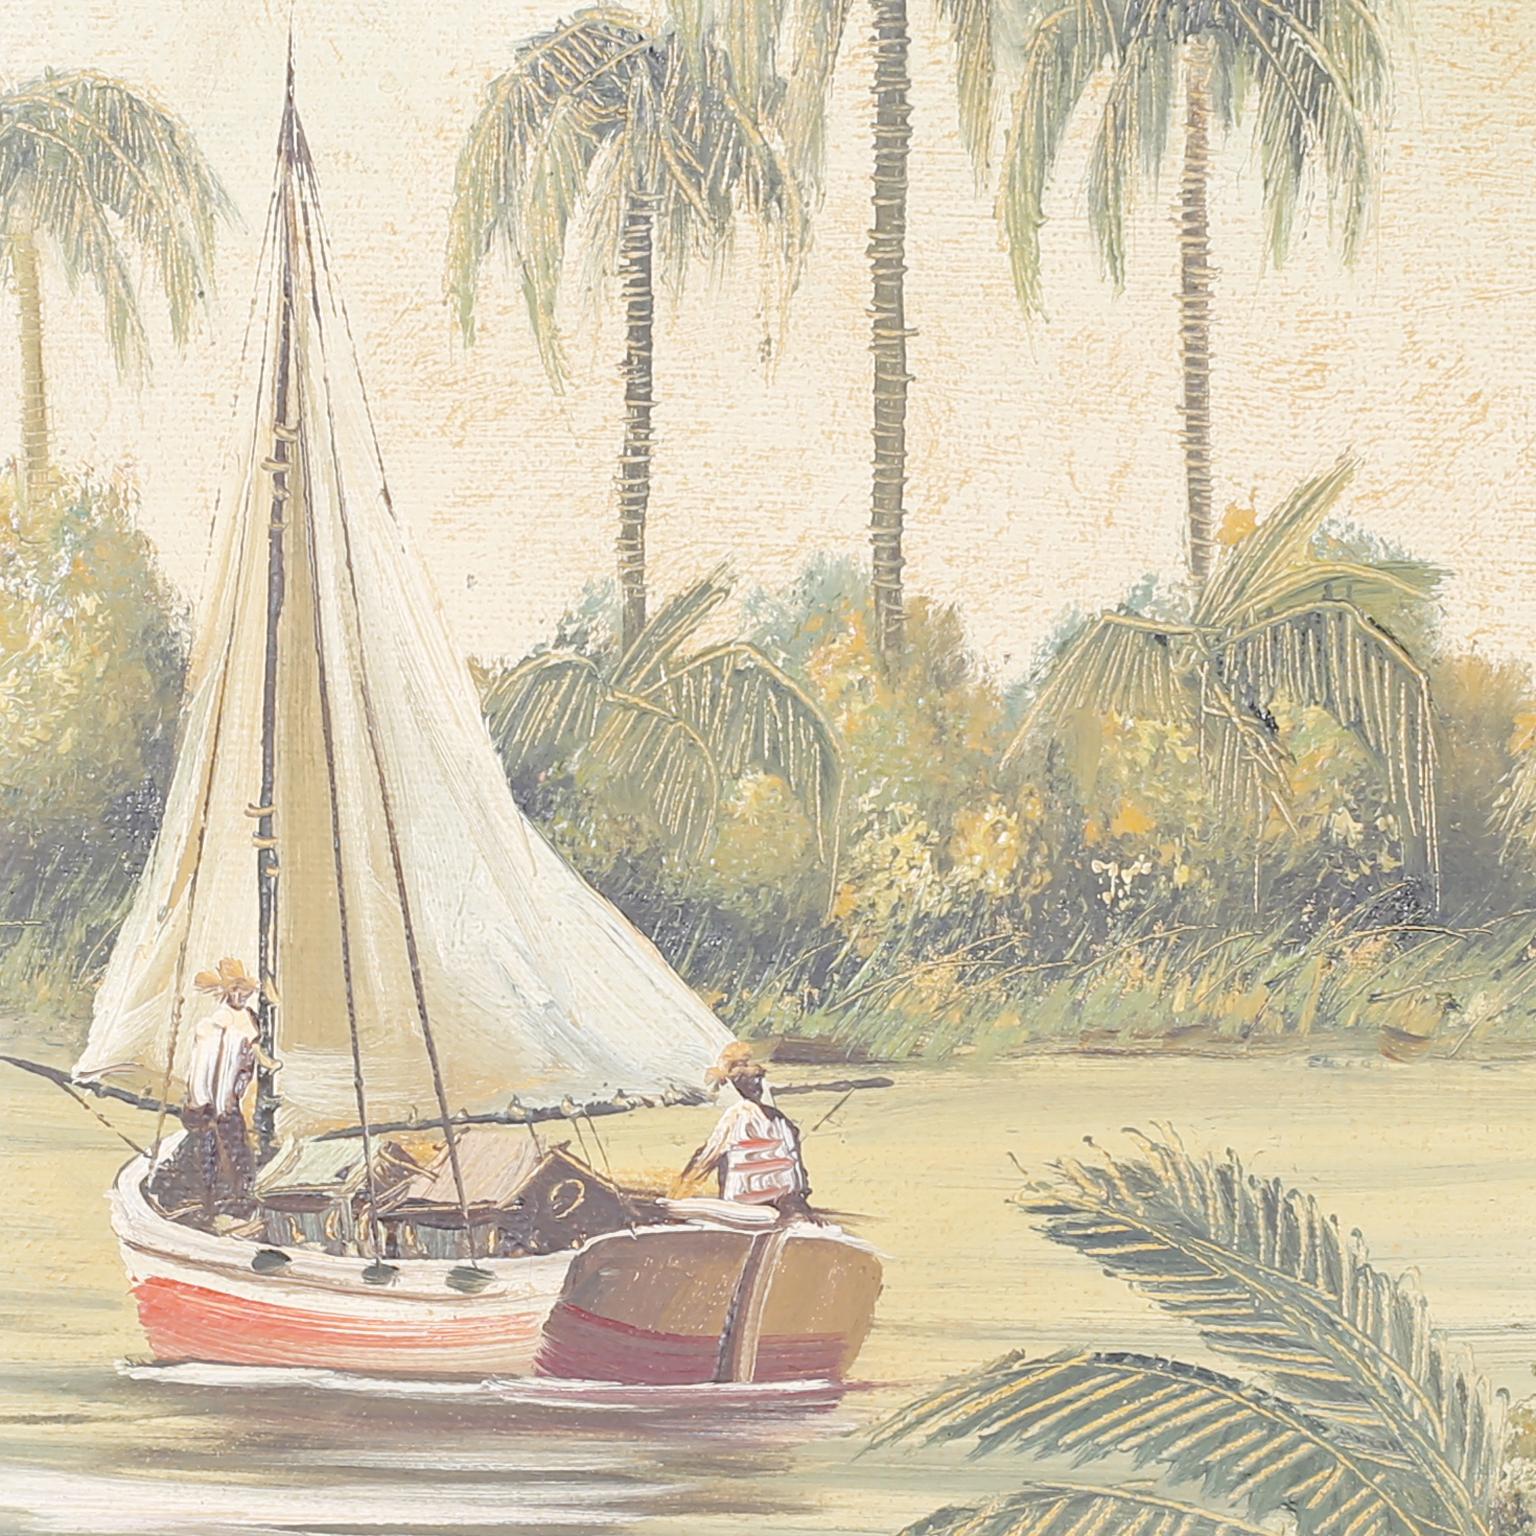 American Vintage Oil Painting on Canvas of a Tropical Scene with Sailboat